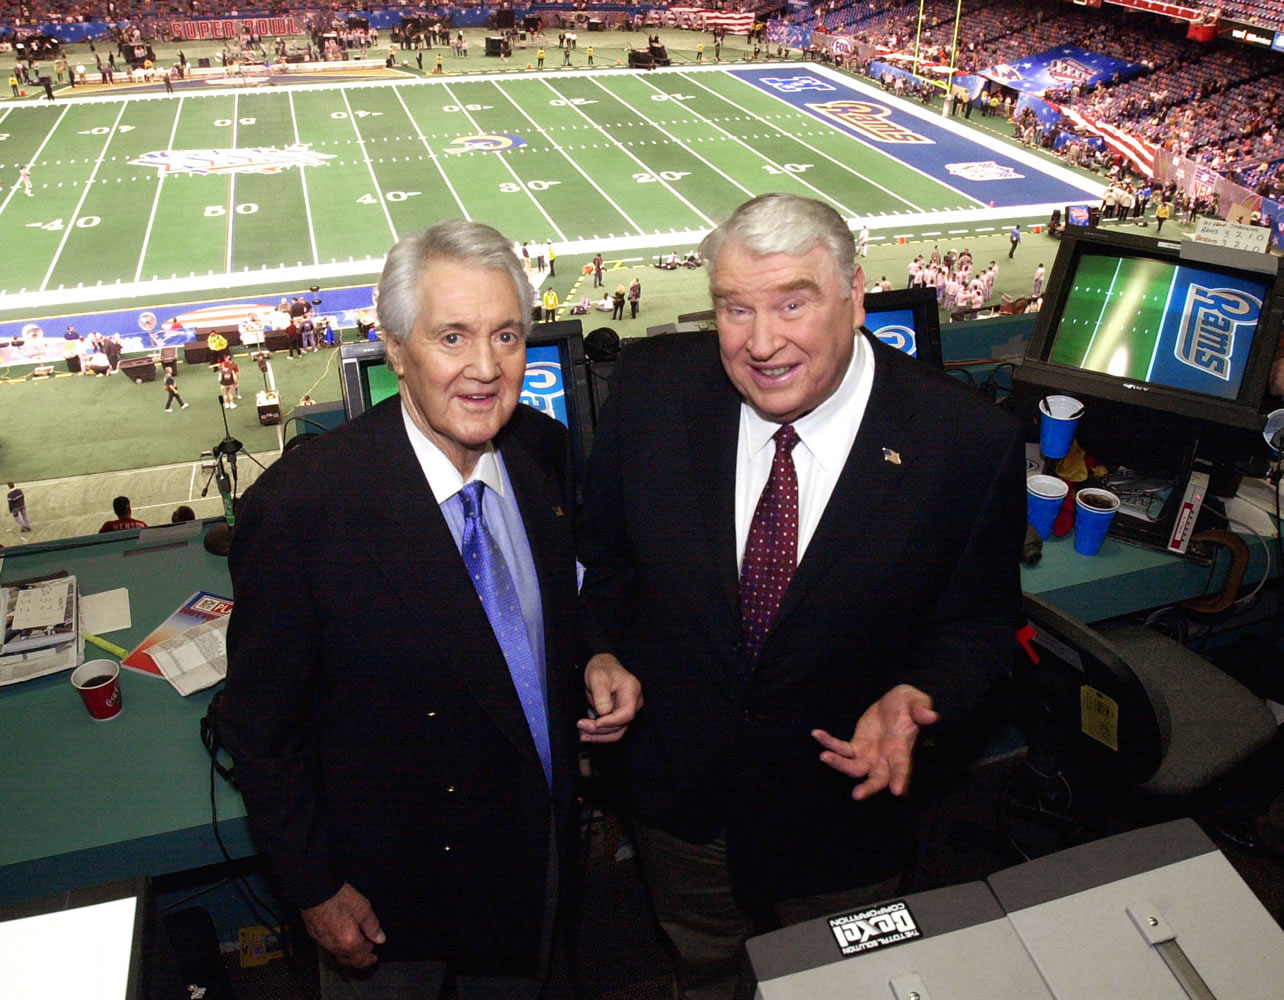 Fox broadcasters Pat Summerall, left, and John Madden stand in the booth at Louisiana Superdome before the NFL Super Bowl XXXVI football game in New Orleans in 2002.